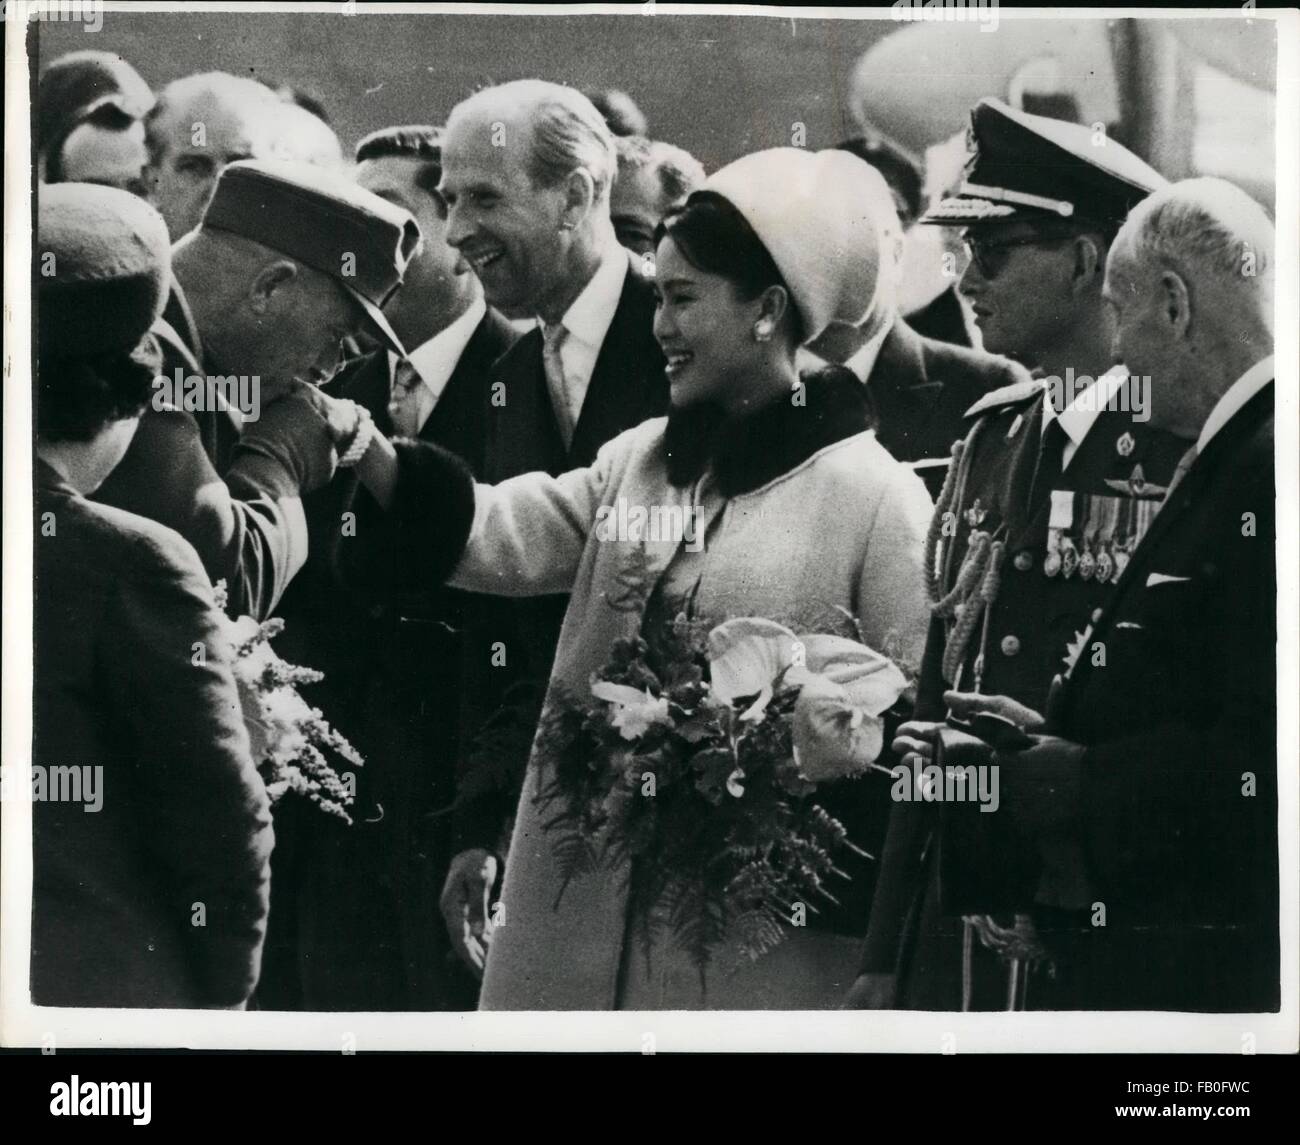 1980 - Beautiful Queen Sirikit Visits Vienna. On Tuesday morning the King and Queen of Thailand, King Bhumibol and his lovely wife Queen Sirikit landed at Vienna airport. They were greeted by the President Dr. Adolf Scharf and the leading men in the Austrian government and taken to the Hotel Imperial where they will be entertained during their stay. They plan to remain there until October 2nd, visiting all the attractions of the Waltz city. OPS: the Austrian President's adjutant Kissing Queen Sirikit's hand and making a small speech of welcome. To her right are King Bhumibol and Dr. Scharf. (C Stock Photo